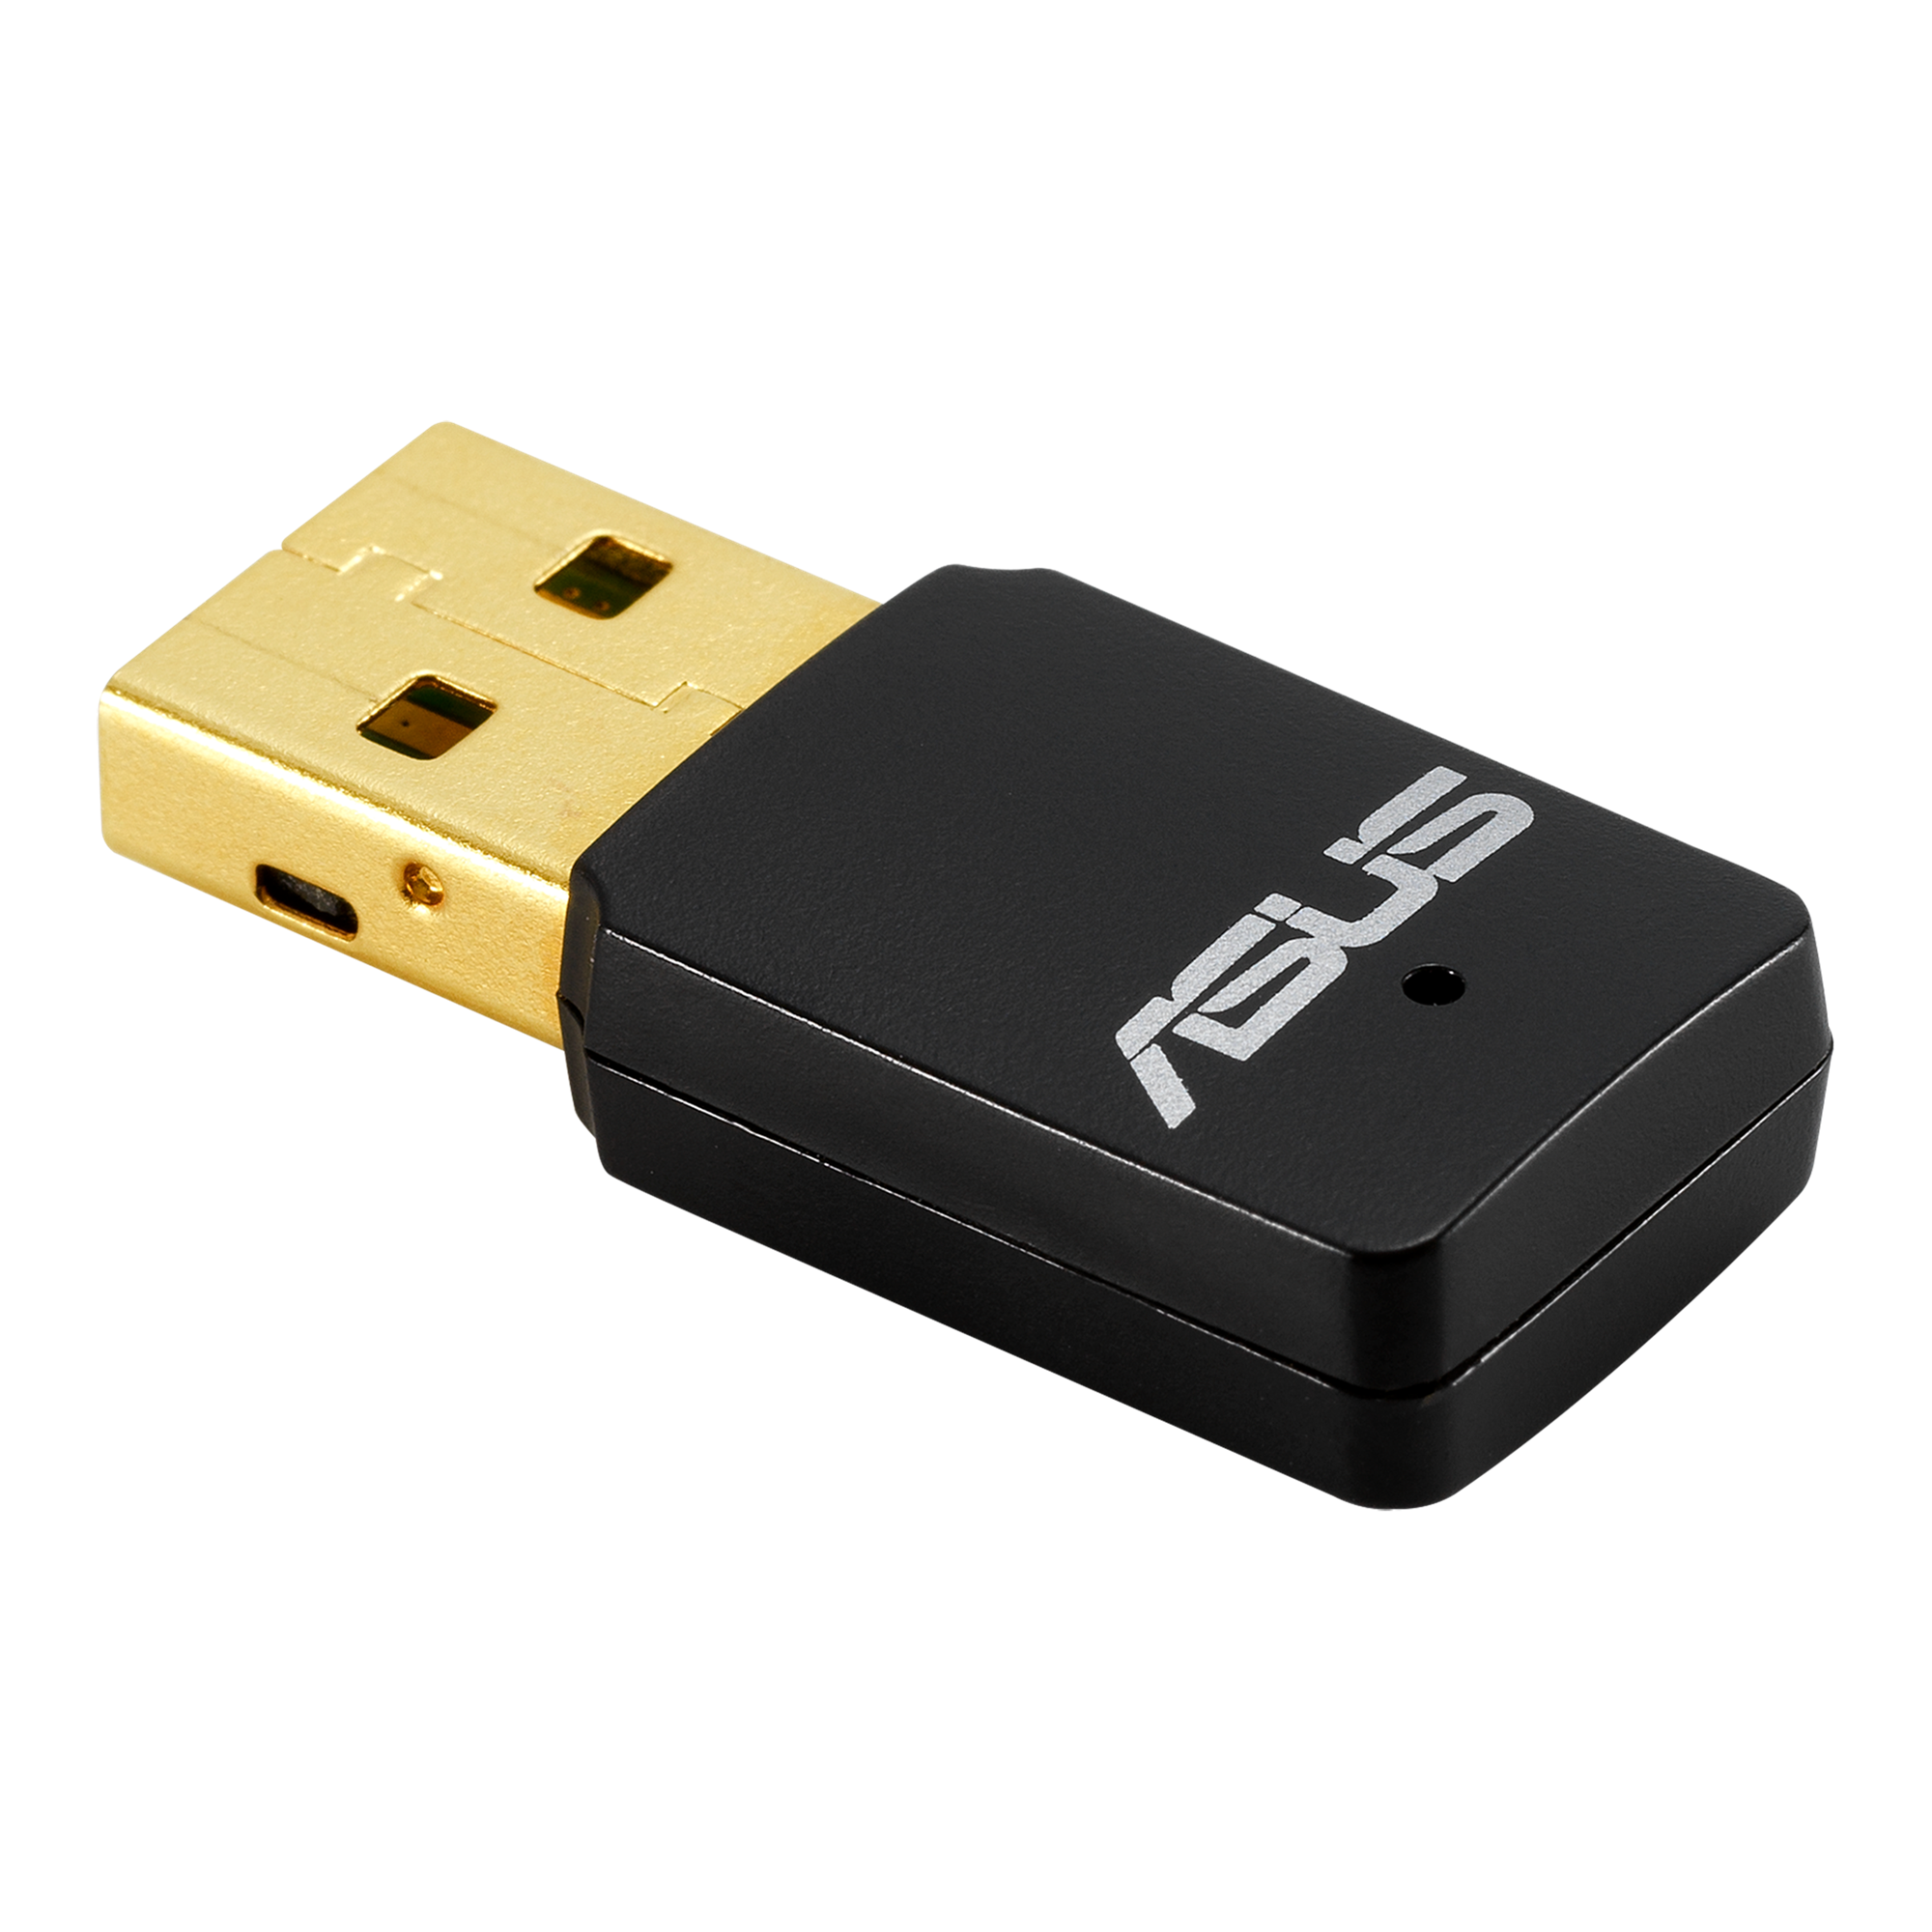 USB-N13 C1｜Wireless Adapters｜ASUS USA